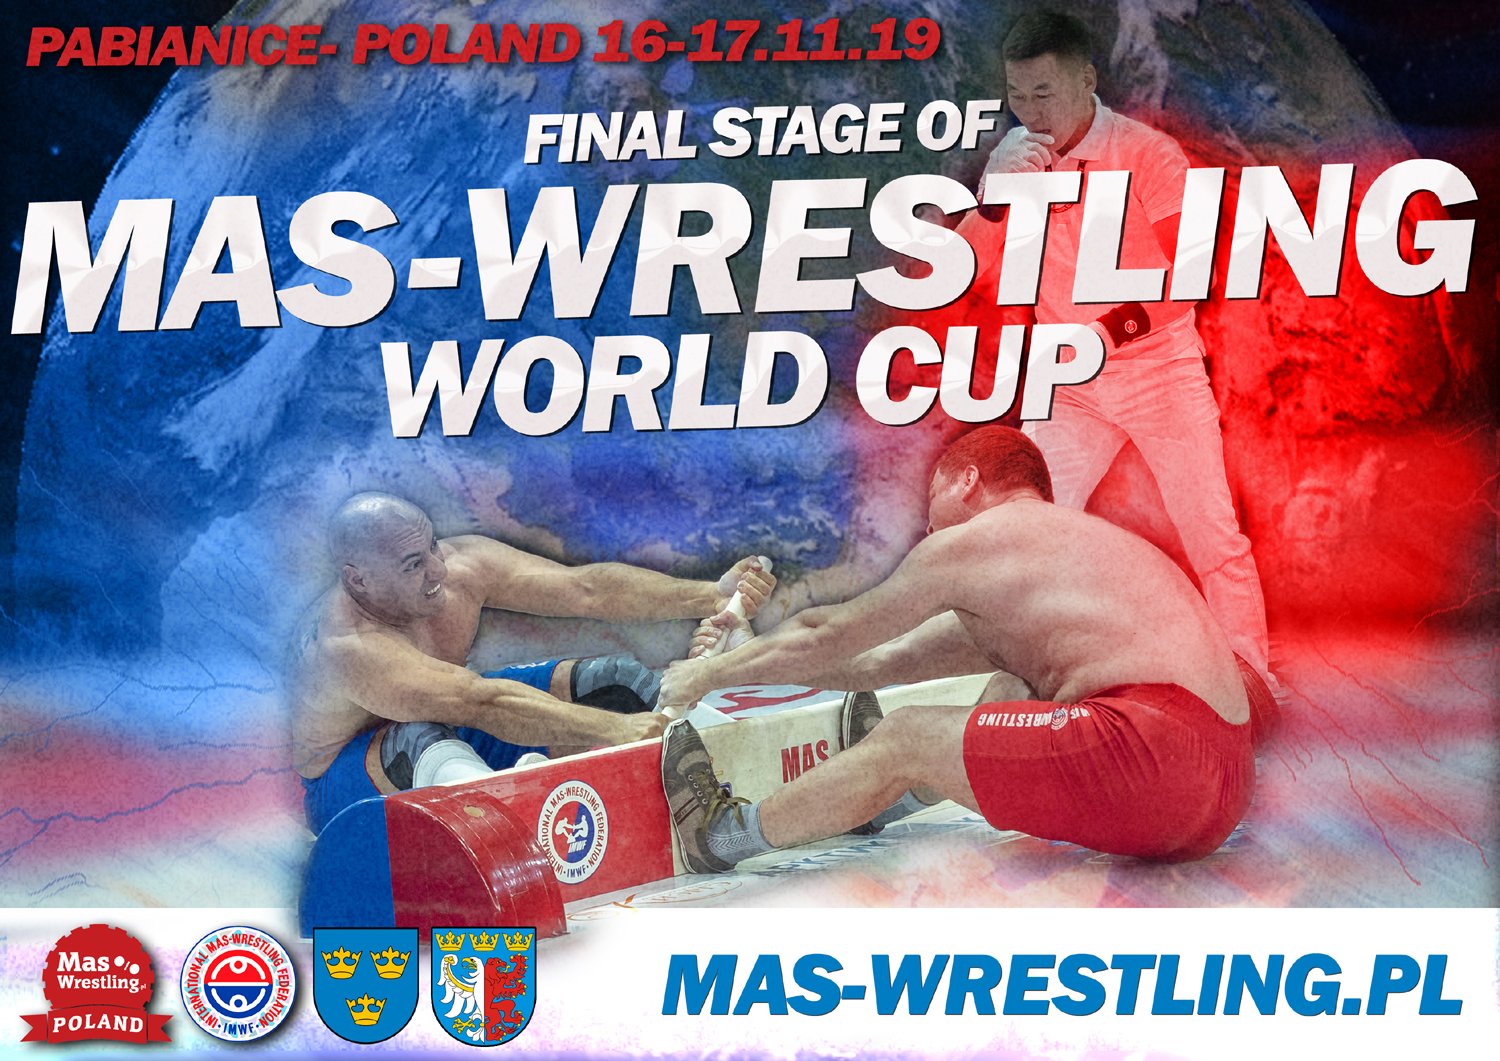 Mas-Wrestling World Cup 2019: the Final Stage. 